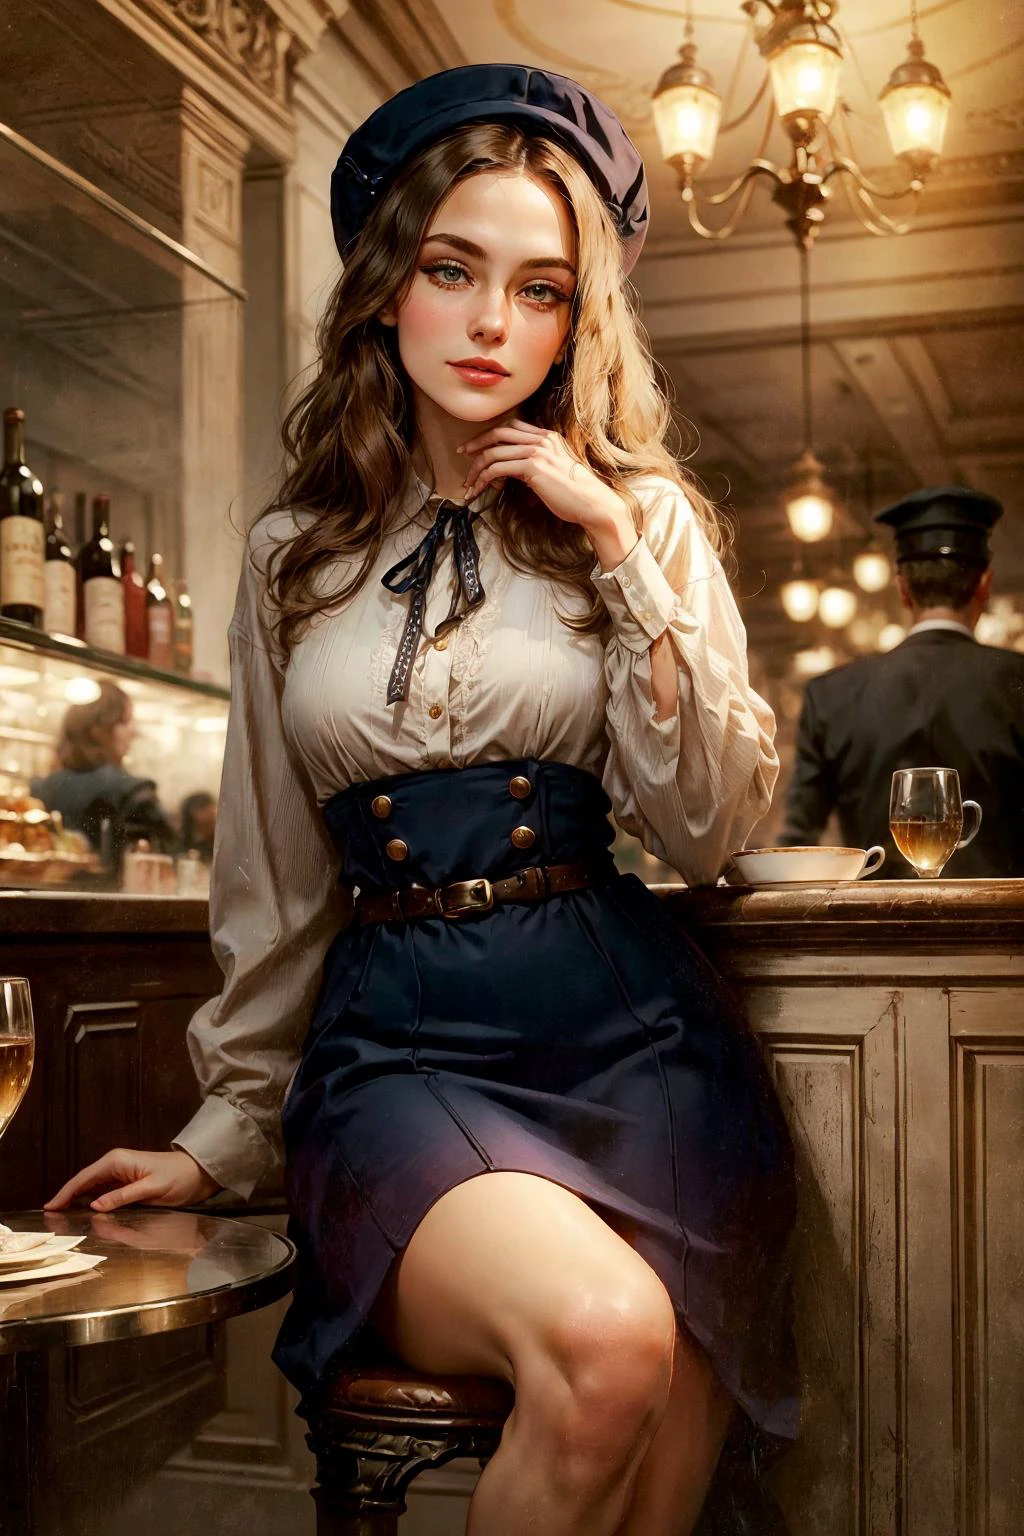 Generate an image that transports us to the enchanting world of the interwar period in Paris, where a young and elegant flight attendant savors a quiet moment at a charming Parisian cafÃ©.
The flight attendant herself embodies the grace and sophistication of the era. She possesses a timeless beauty and slender figure that complements her chic and vintage attire, perfectly in sync with the ambiance of the interwar period.
Her hair, a rich chestnut hue, is elegantly styled in loose waves that frame her face. Her eyes, a captivating shade of deep hazel, reflect both the allure of Paris and a sense of curiosity. Long, dark eyelashes emphasize her eyes, and she wears subtle brown eyeshadow that adds to her sophistication.
Her facial features are delicately proportioned, featuring a  nose and high cheekbones that evoke the elegance of the interwar era. Her lips, with a natural rosy tint, form a warm and inviting smile that exudes charm and grace.
The flight attendant's attire is a testament to the fashion of the timeâa tailored, knee-length dress cinched at the waist and flared at the skirt. She wears a stylish cloche hat adorned with a ribbon, adding an air of sophistication. Classic pumps and a vintage leather handbag complete her ensemble.
As she sits at the Parisian cafÃ©, she enjoys a cup of coffee, her delicate fingers wrapped around the warm porcelain cup. The cafÃ© exudes an authentic interwar atmosphere, with wrought-iron tables and chairs, checkered tablecloths, and the soft hum of conversation in the background.
The image is bathed in the soft, romantic light of a Parisian afternoon, casting a warm and nostalgic glow over the scene. It captures a fleeting moment in time, where the flight attendant relishes the magic of Paris during the interwar period, embodying the spirit of elegance and exploration.
This revised prompt focuses on the flight attendant's experience at a Parisian cafÃ©, maintaining the interwar atmosphere.  